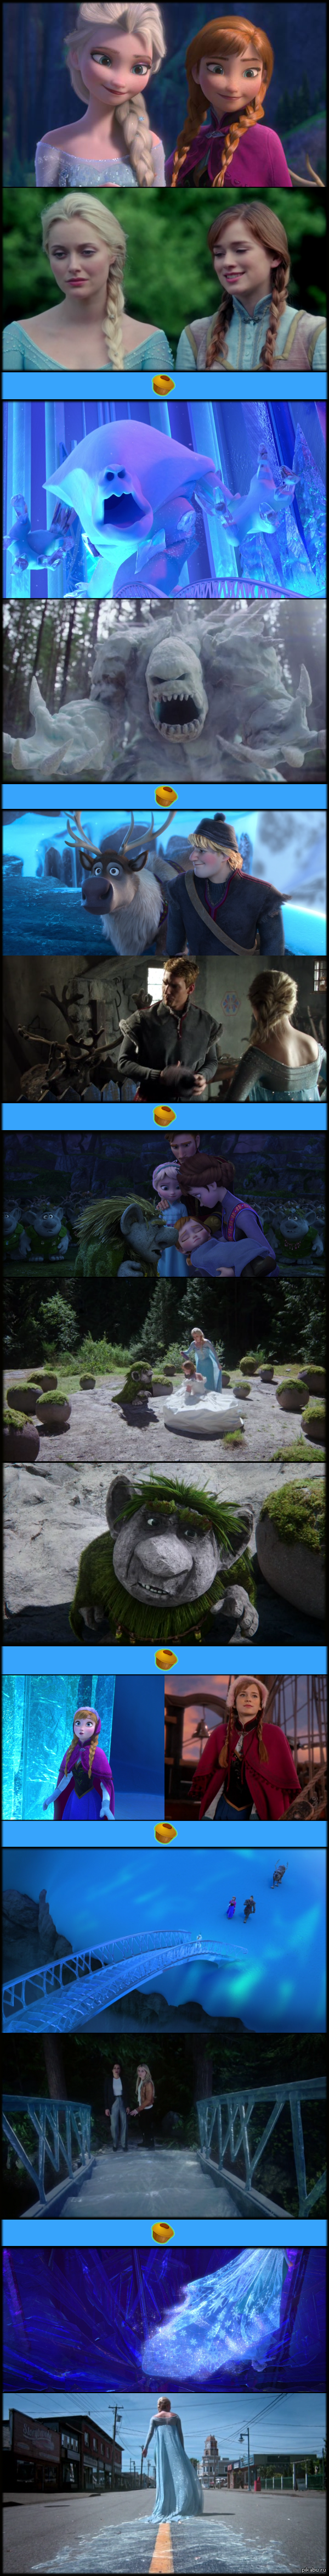 Frozen/Once upon a time crossover   4   "  ".  ,   ,  , .  